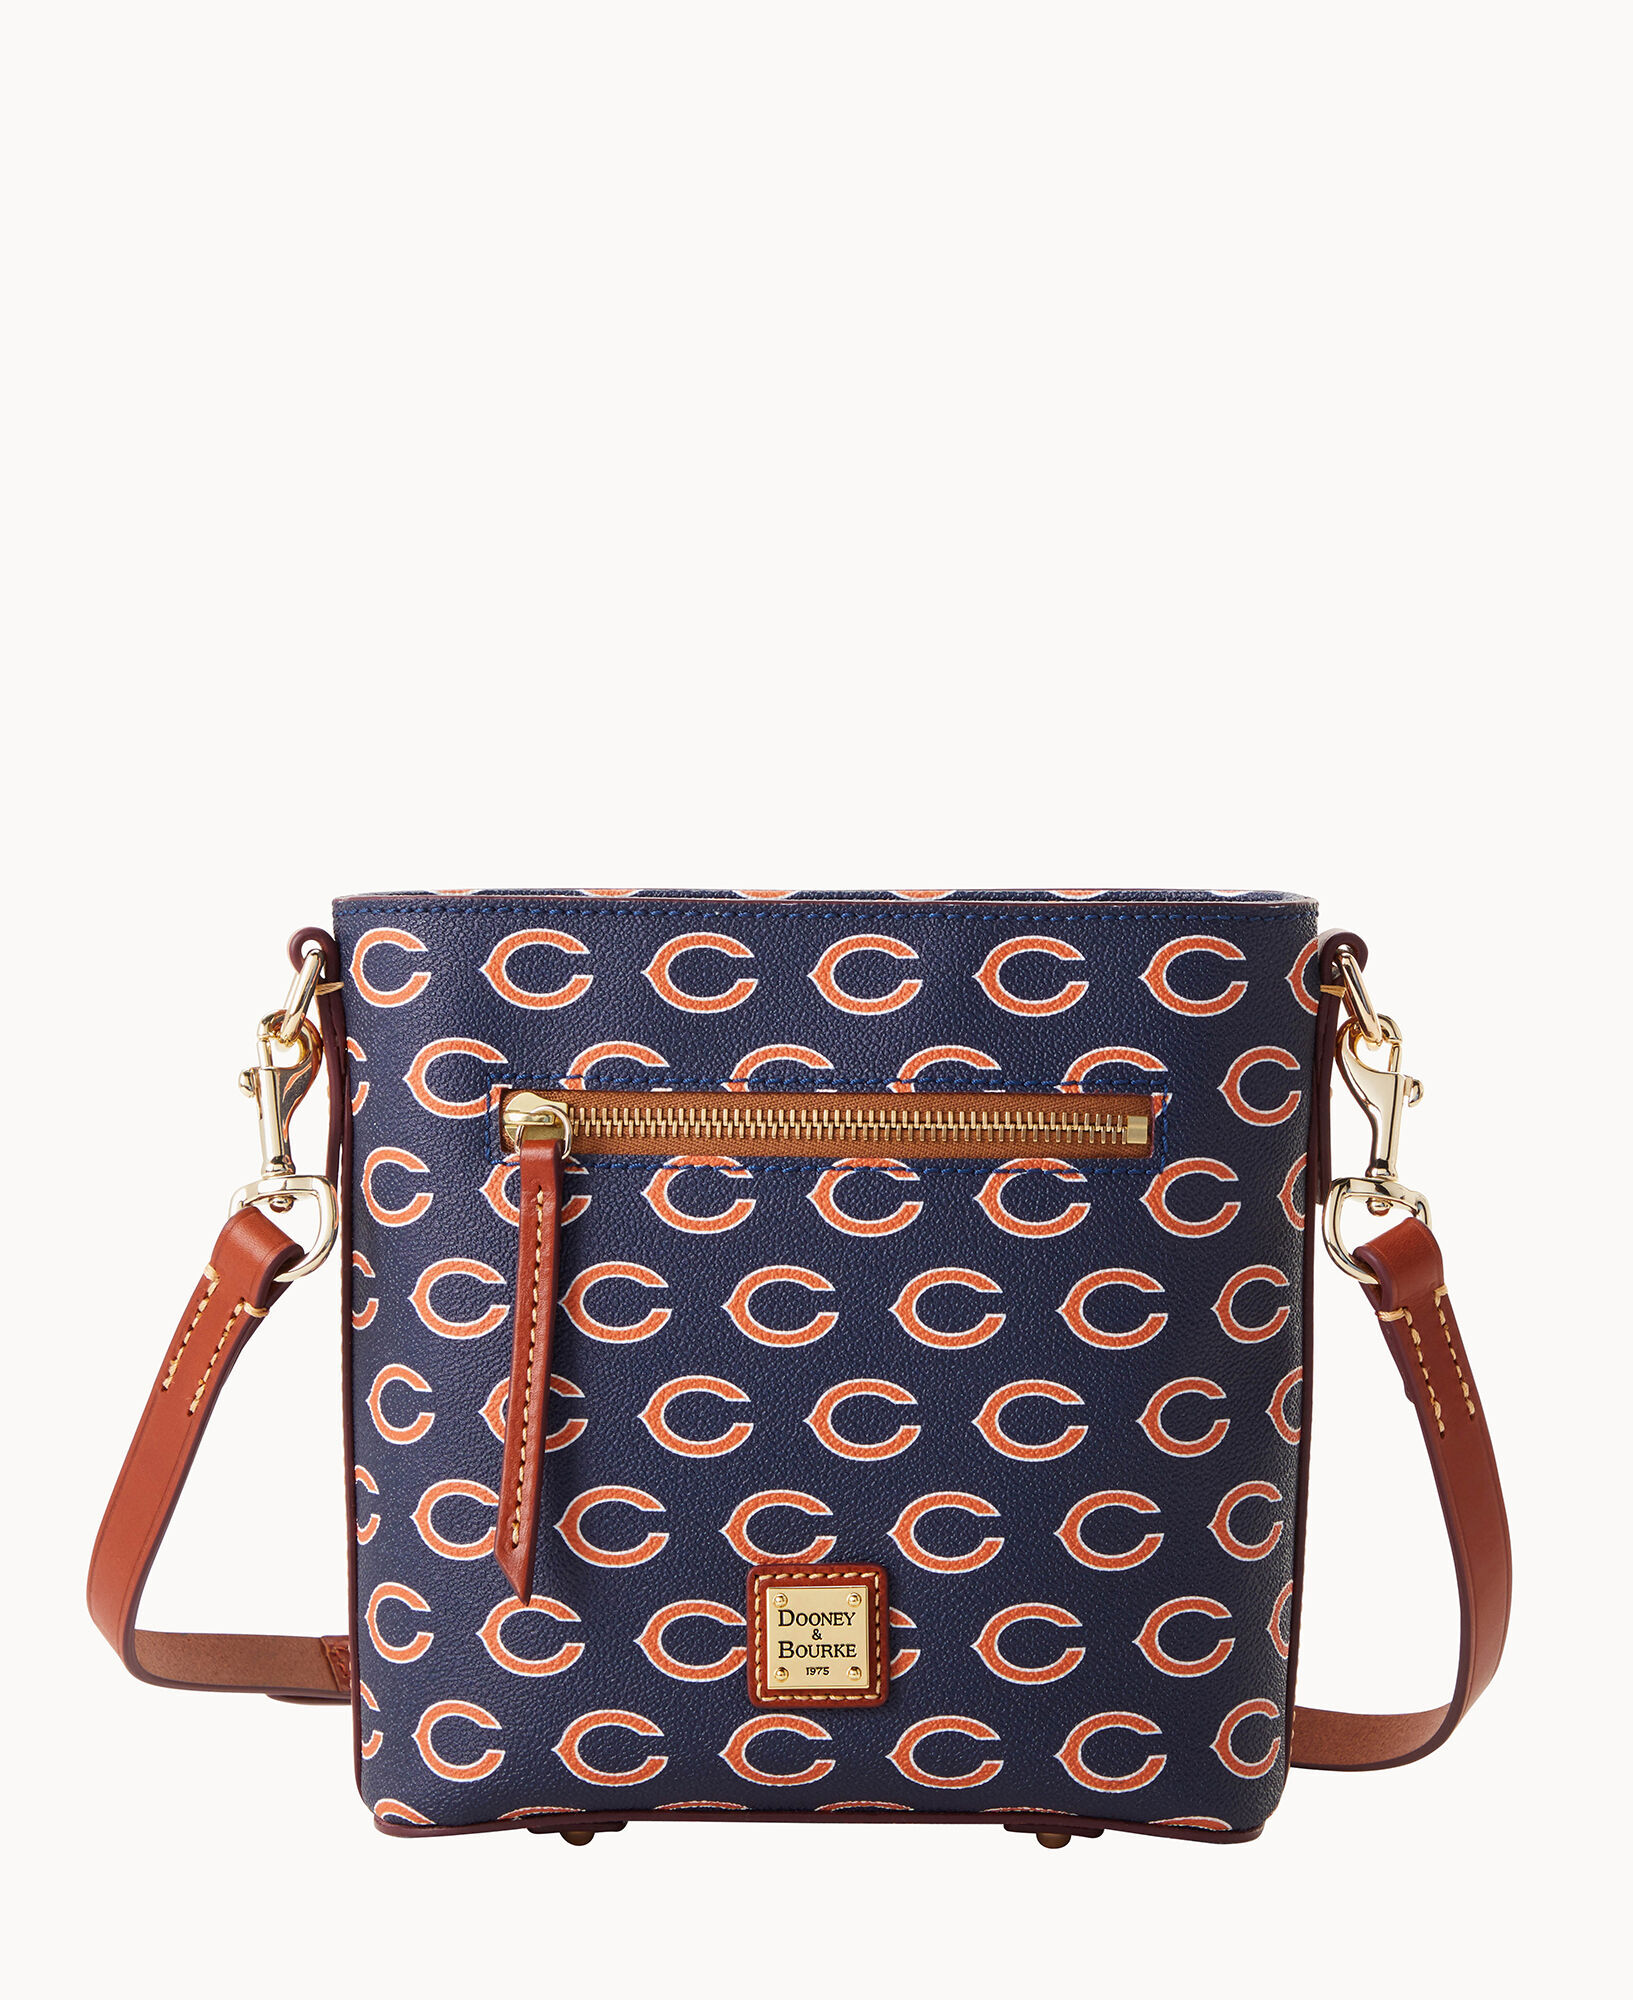 Dooney & Bourke CHICAGO CUBS Crossbody and similar items